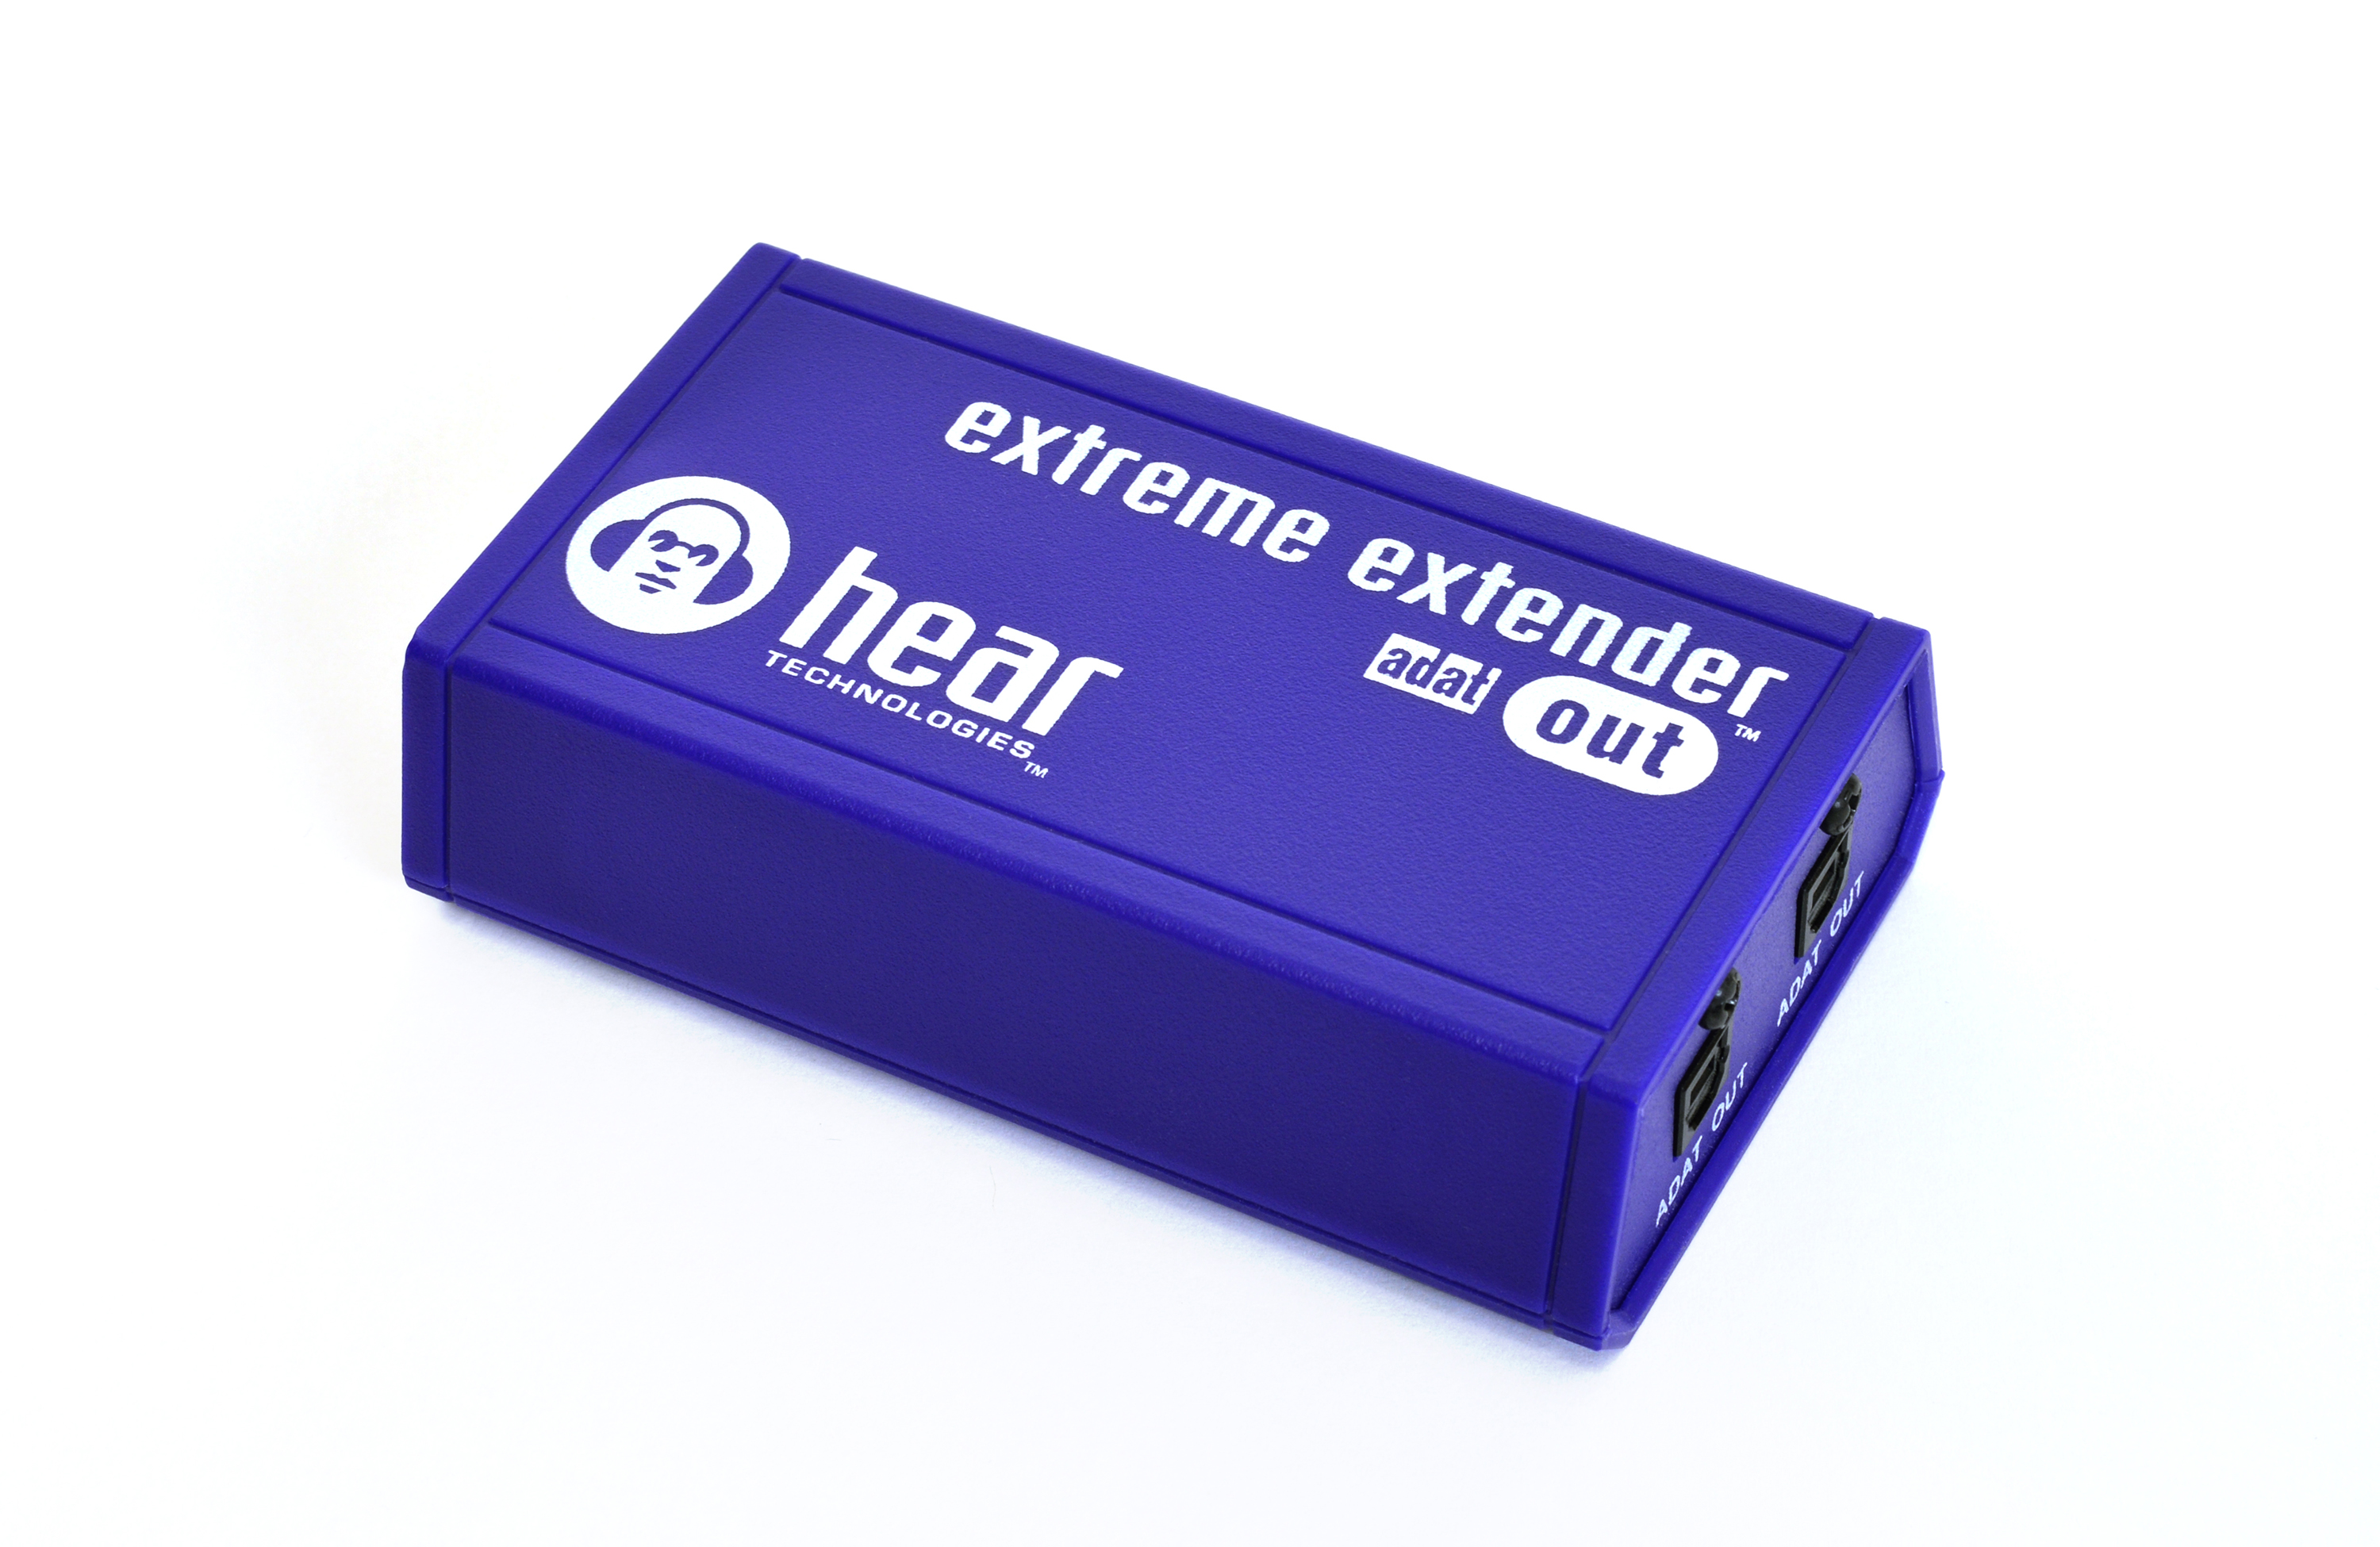 Extreme Extender ADAT®   Out